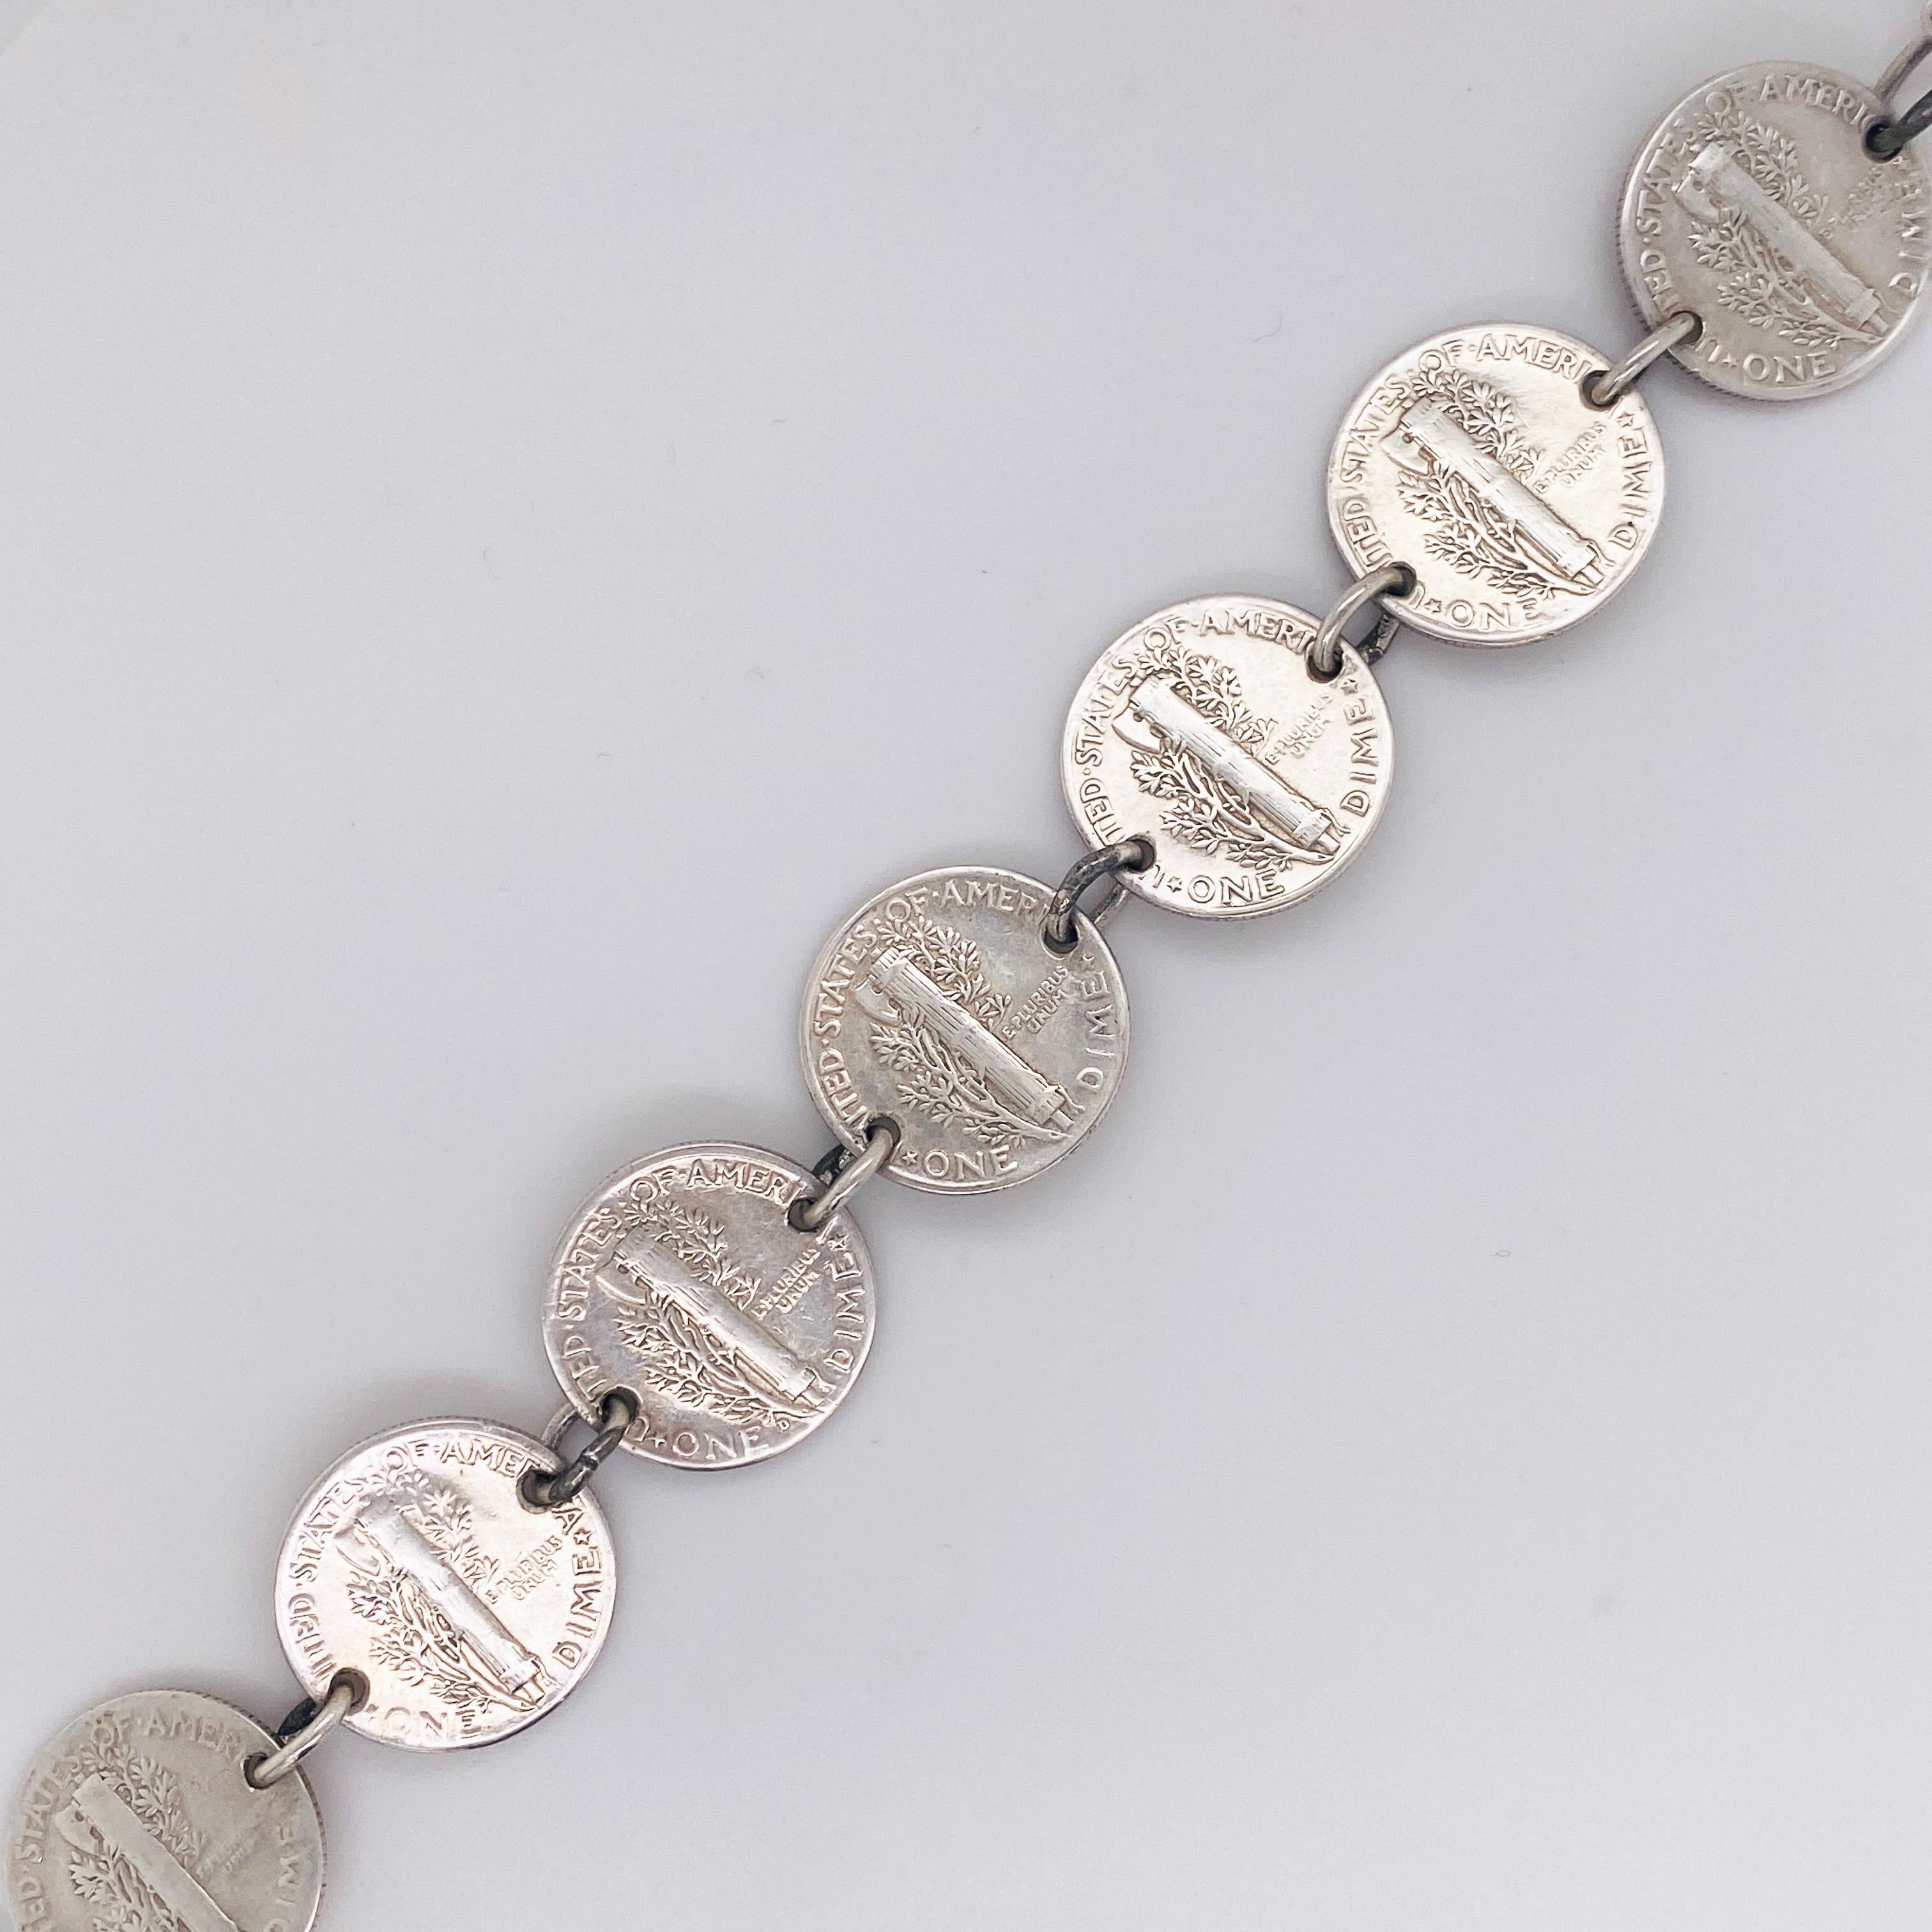 This sterling bracelet is one of a kind! It is made of seven mercury dimes that are held together by sterling silver jump rings. The bracelet has a sterling silver toggle clasp that is easy for putting on and off. This bracelet was designed for a